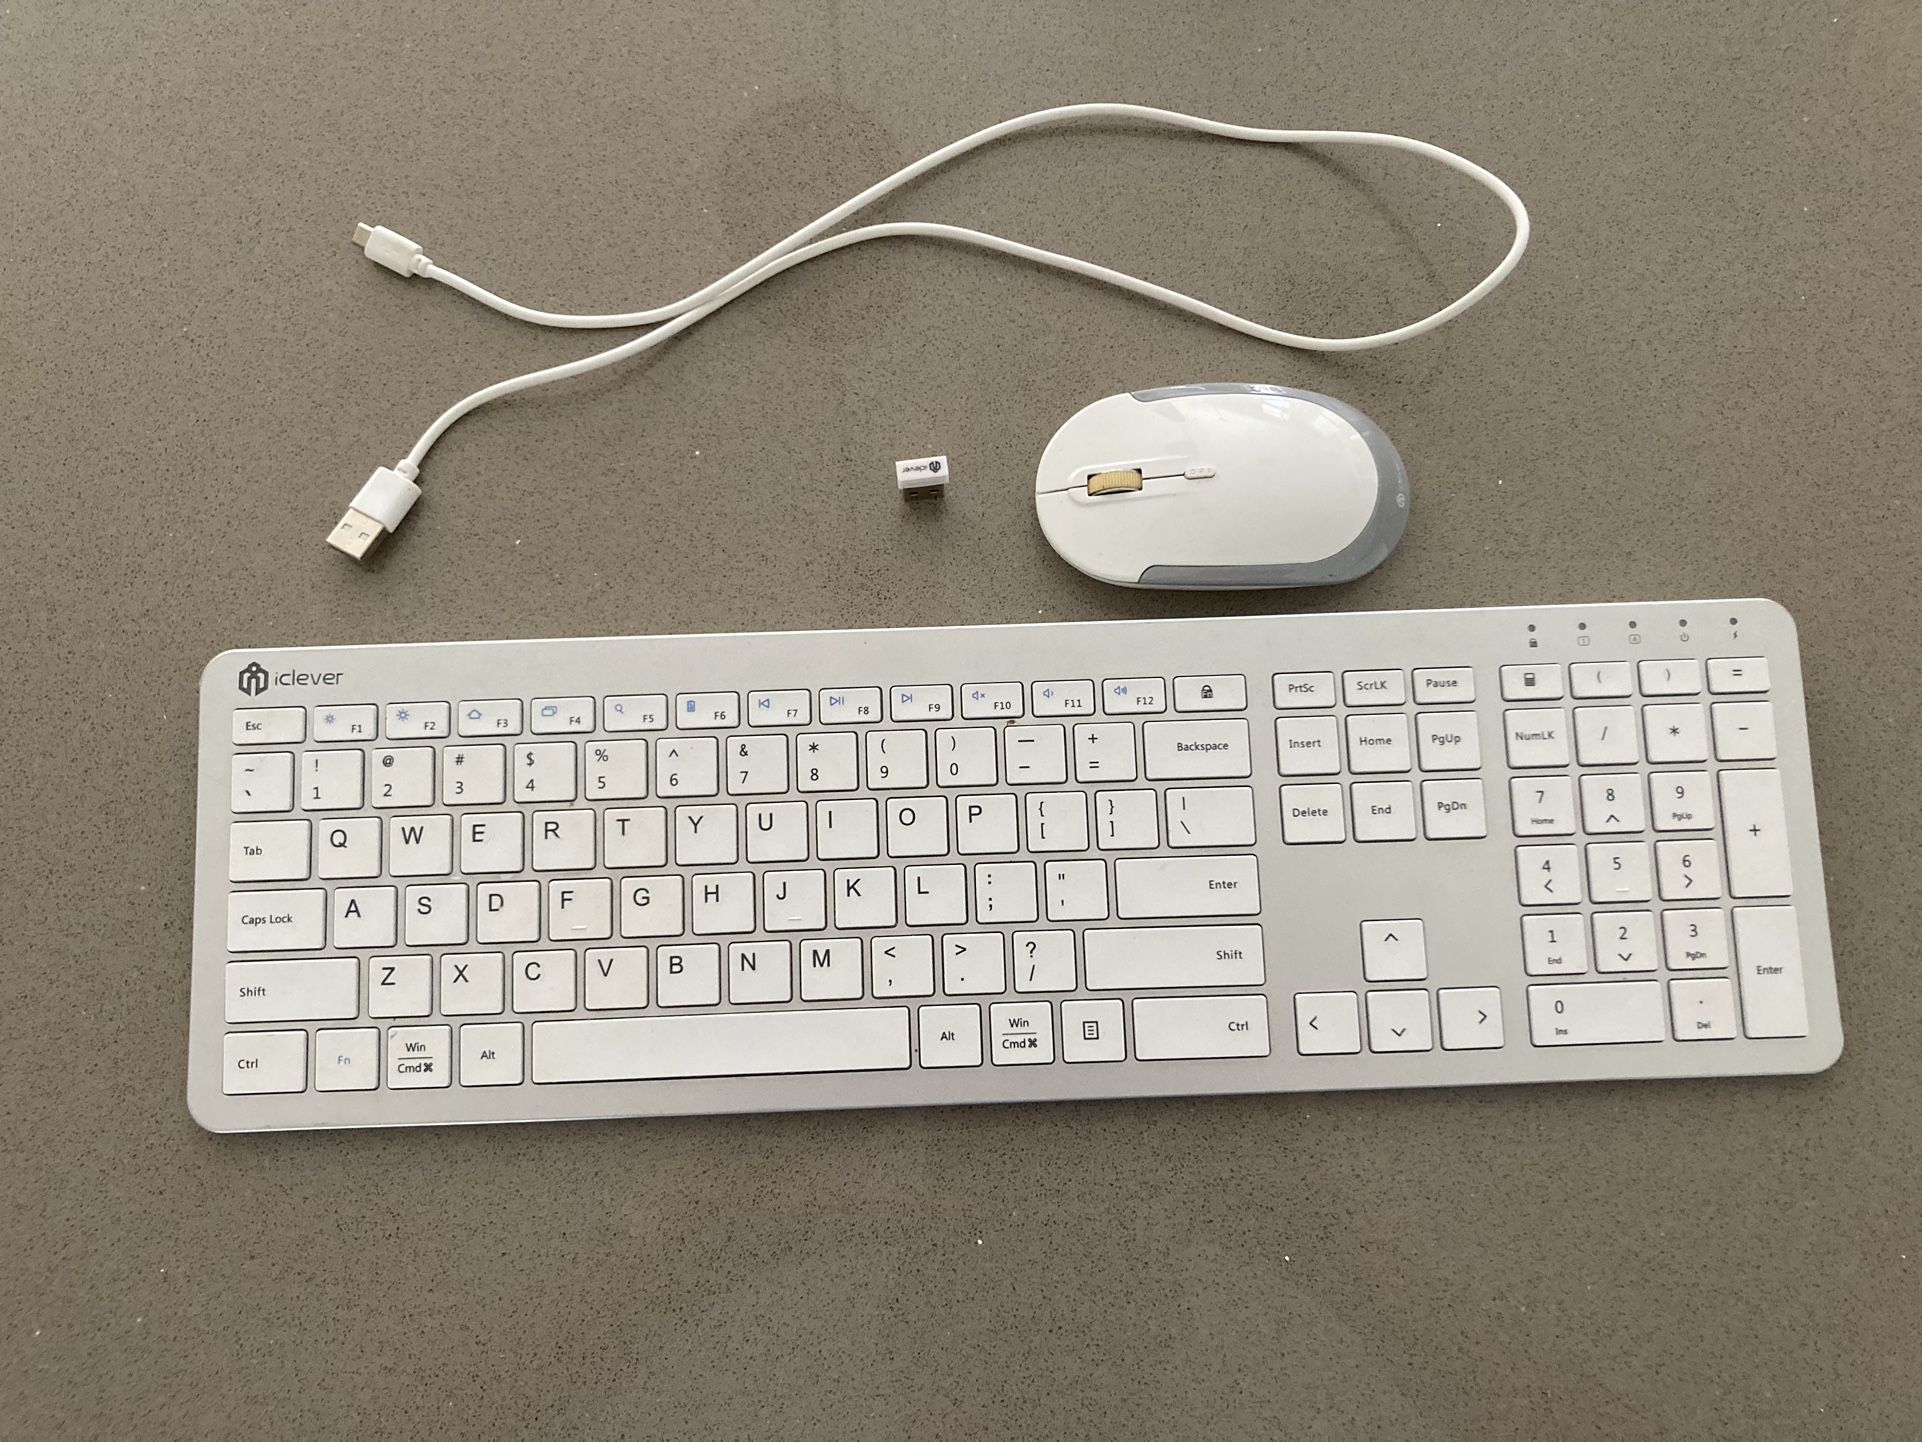 iClever GK08 Wireless Keyboard and Mouse